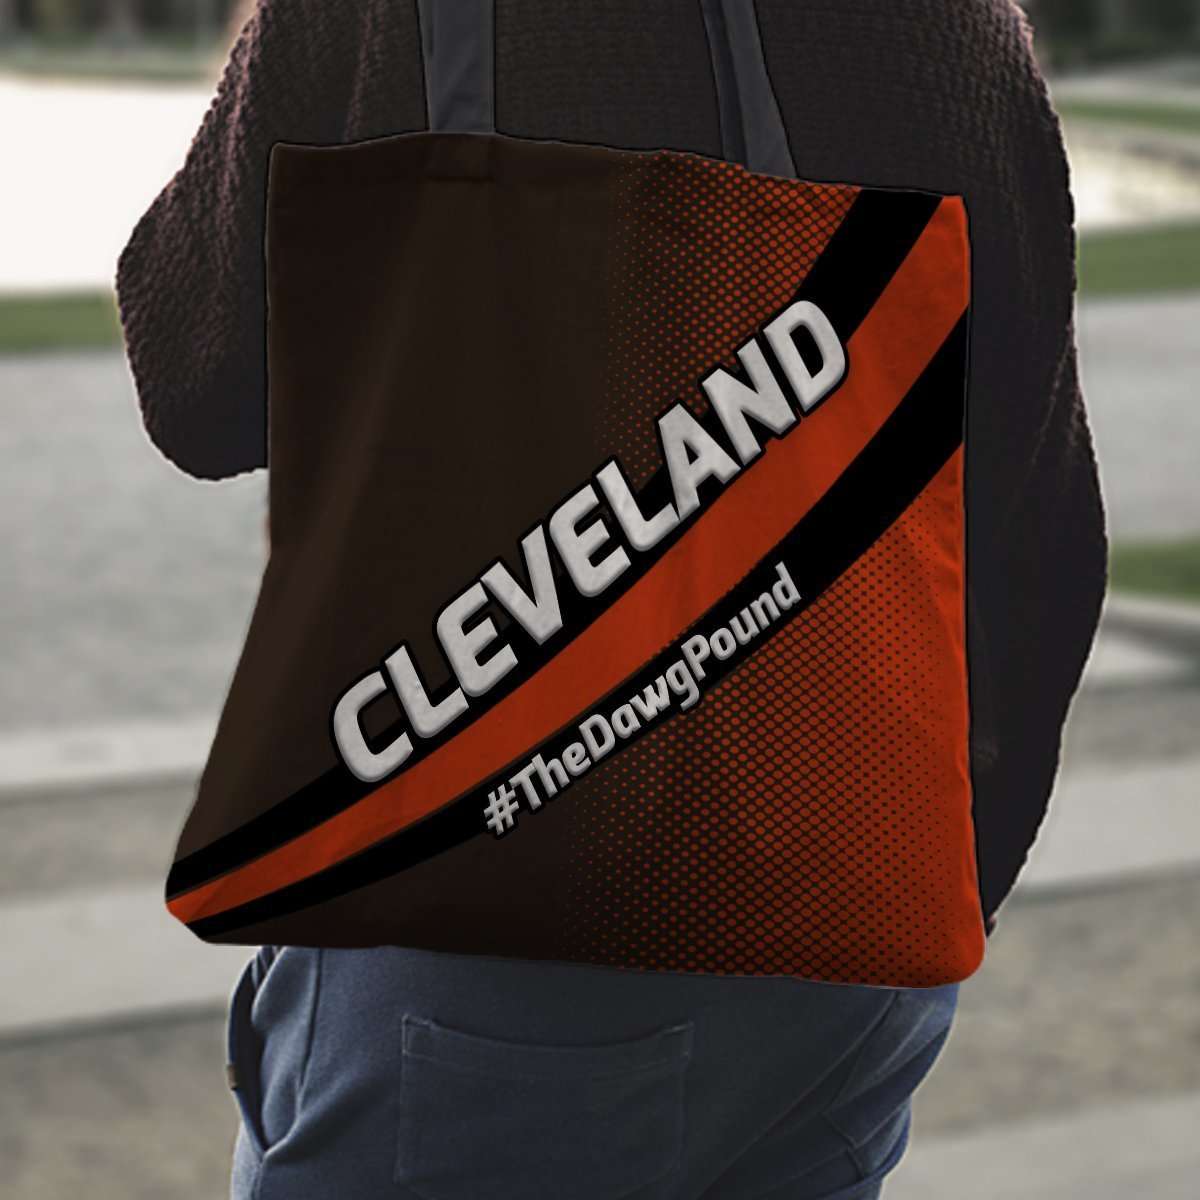 Designs by MyUtopia Shout Out:#TheDawgPound Cleveland Fan Fabric Totebag Reusable Shopping Tote